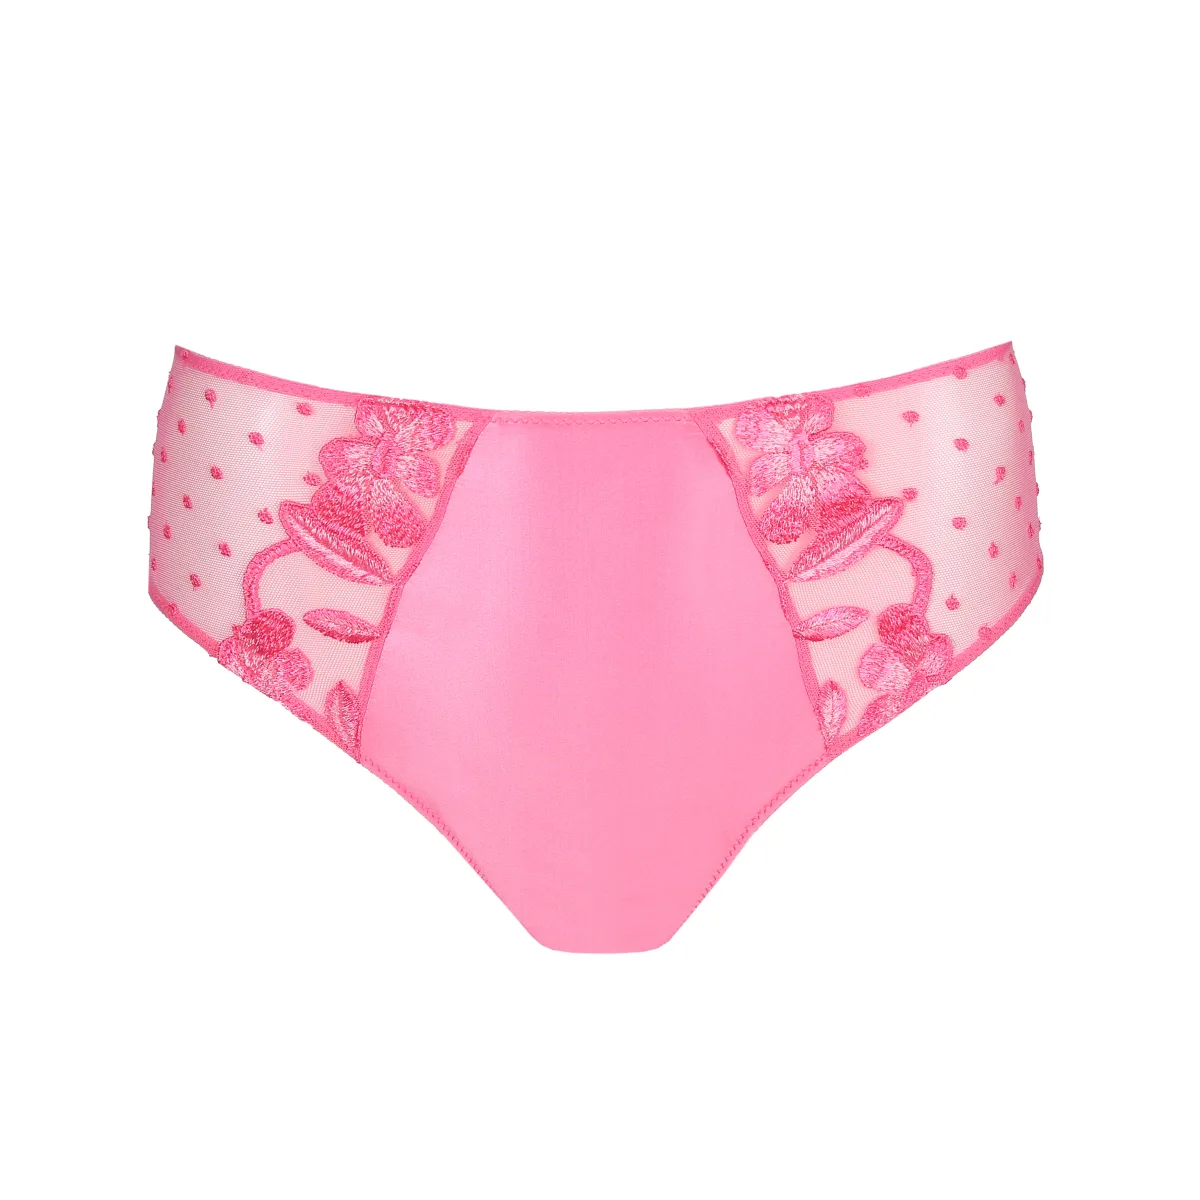 Marie Jo AGNES Paradise Pink full briefs | Marie Jo United States